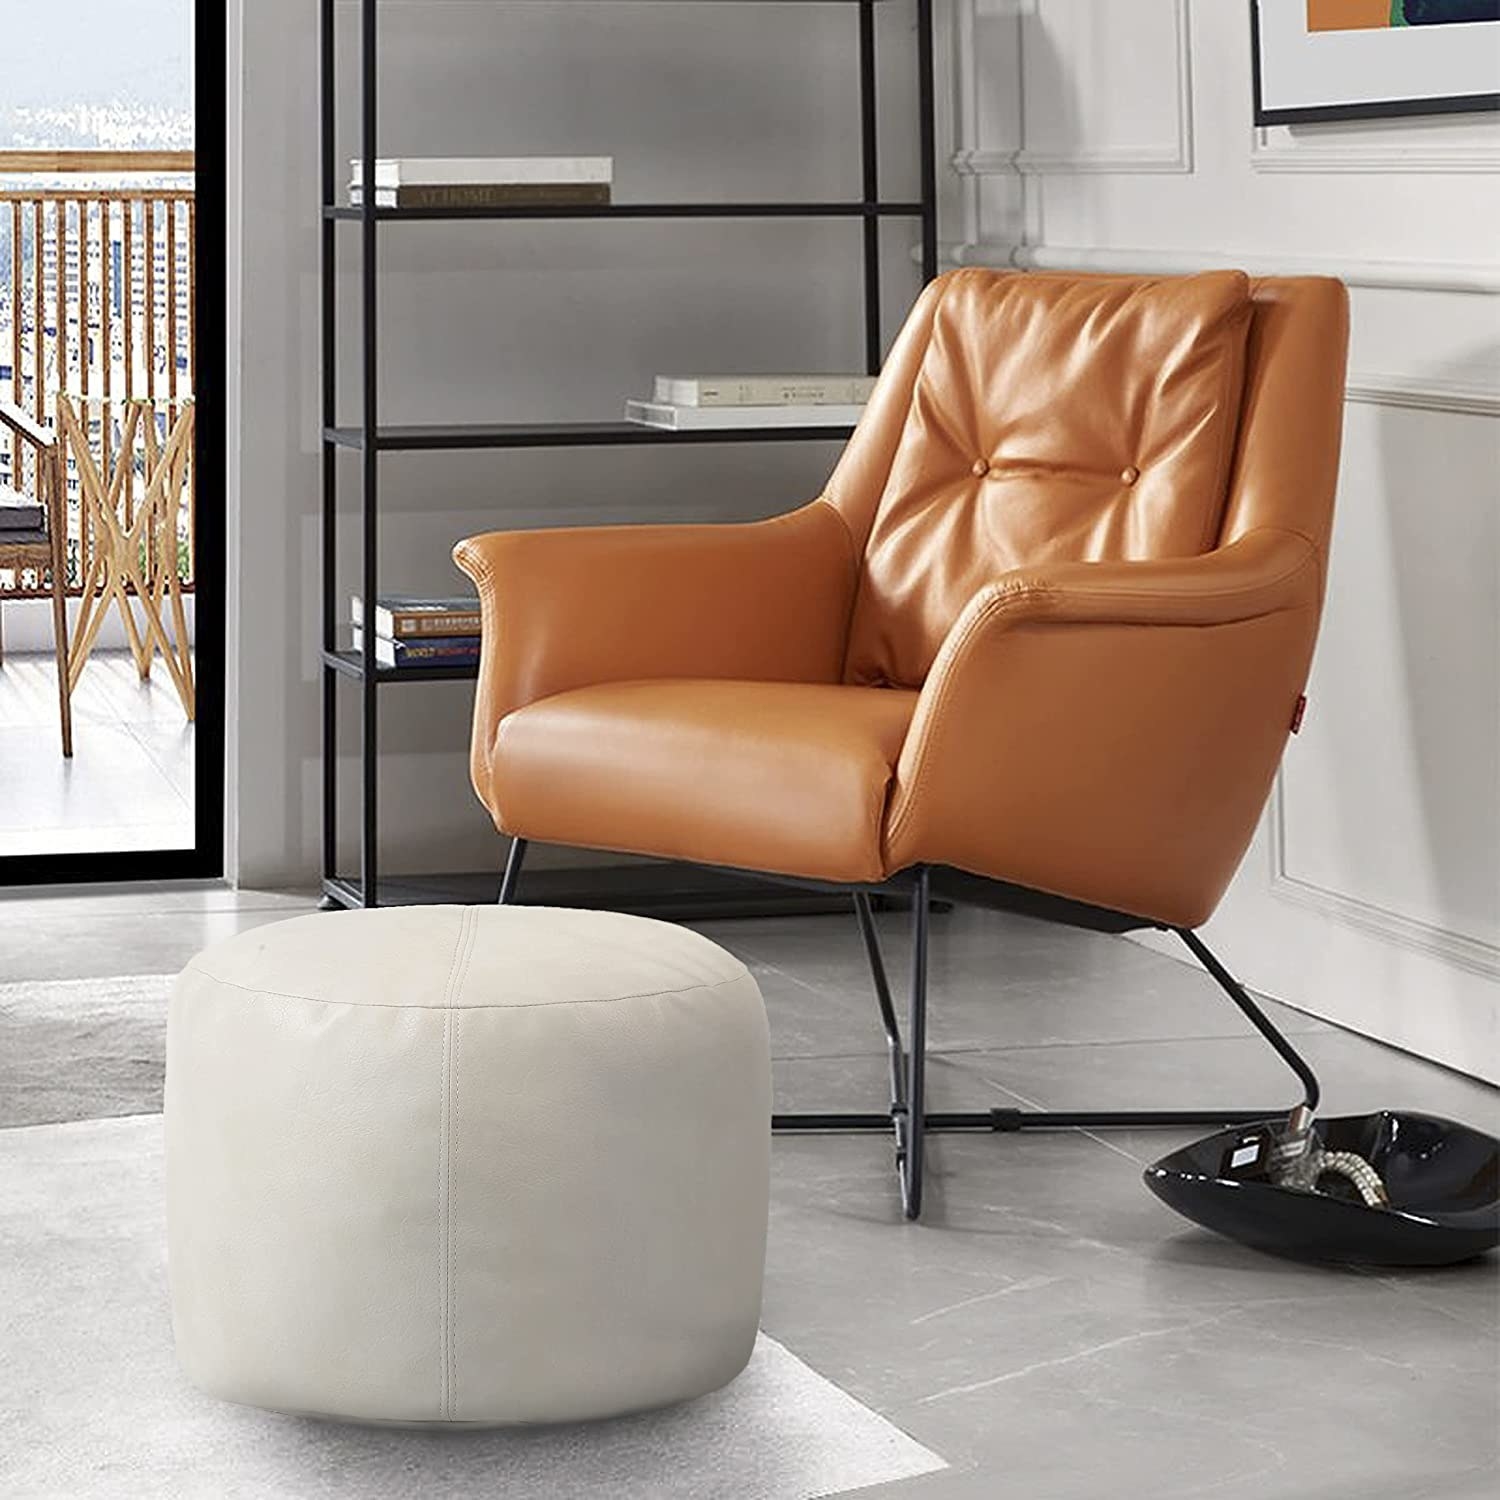 the pouf next to a leather seat